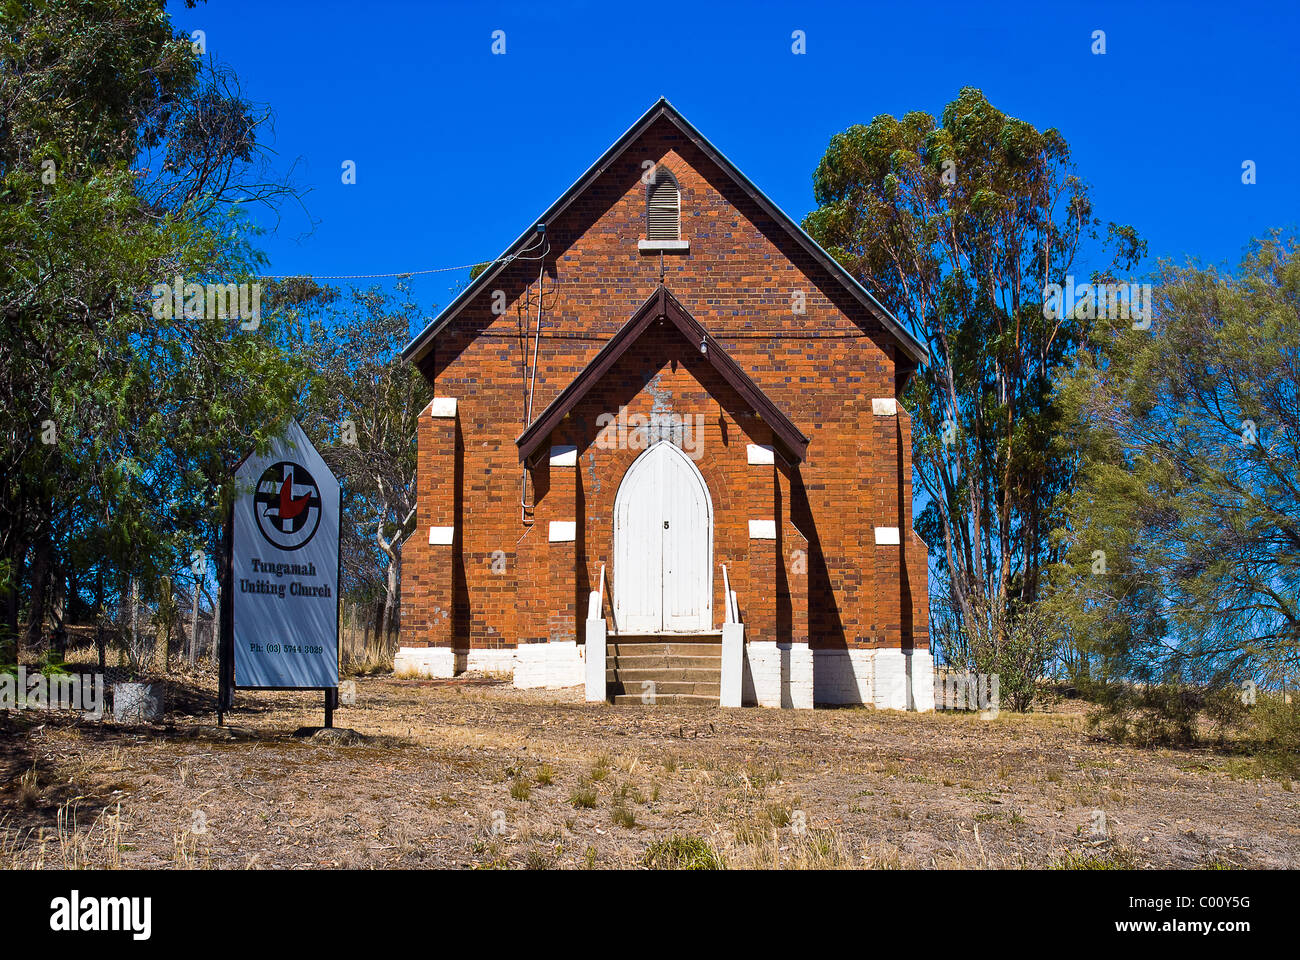 Tungamah Uniting Church,Tungamah,Victoria,Australia is situated in a small wheat town with some historic buildings. Stock Photo